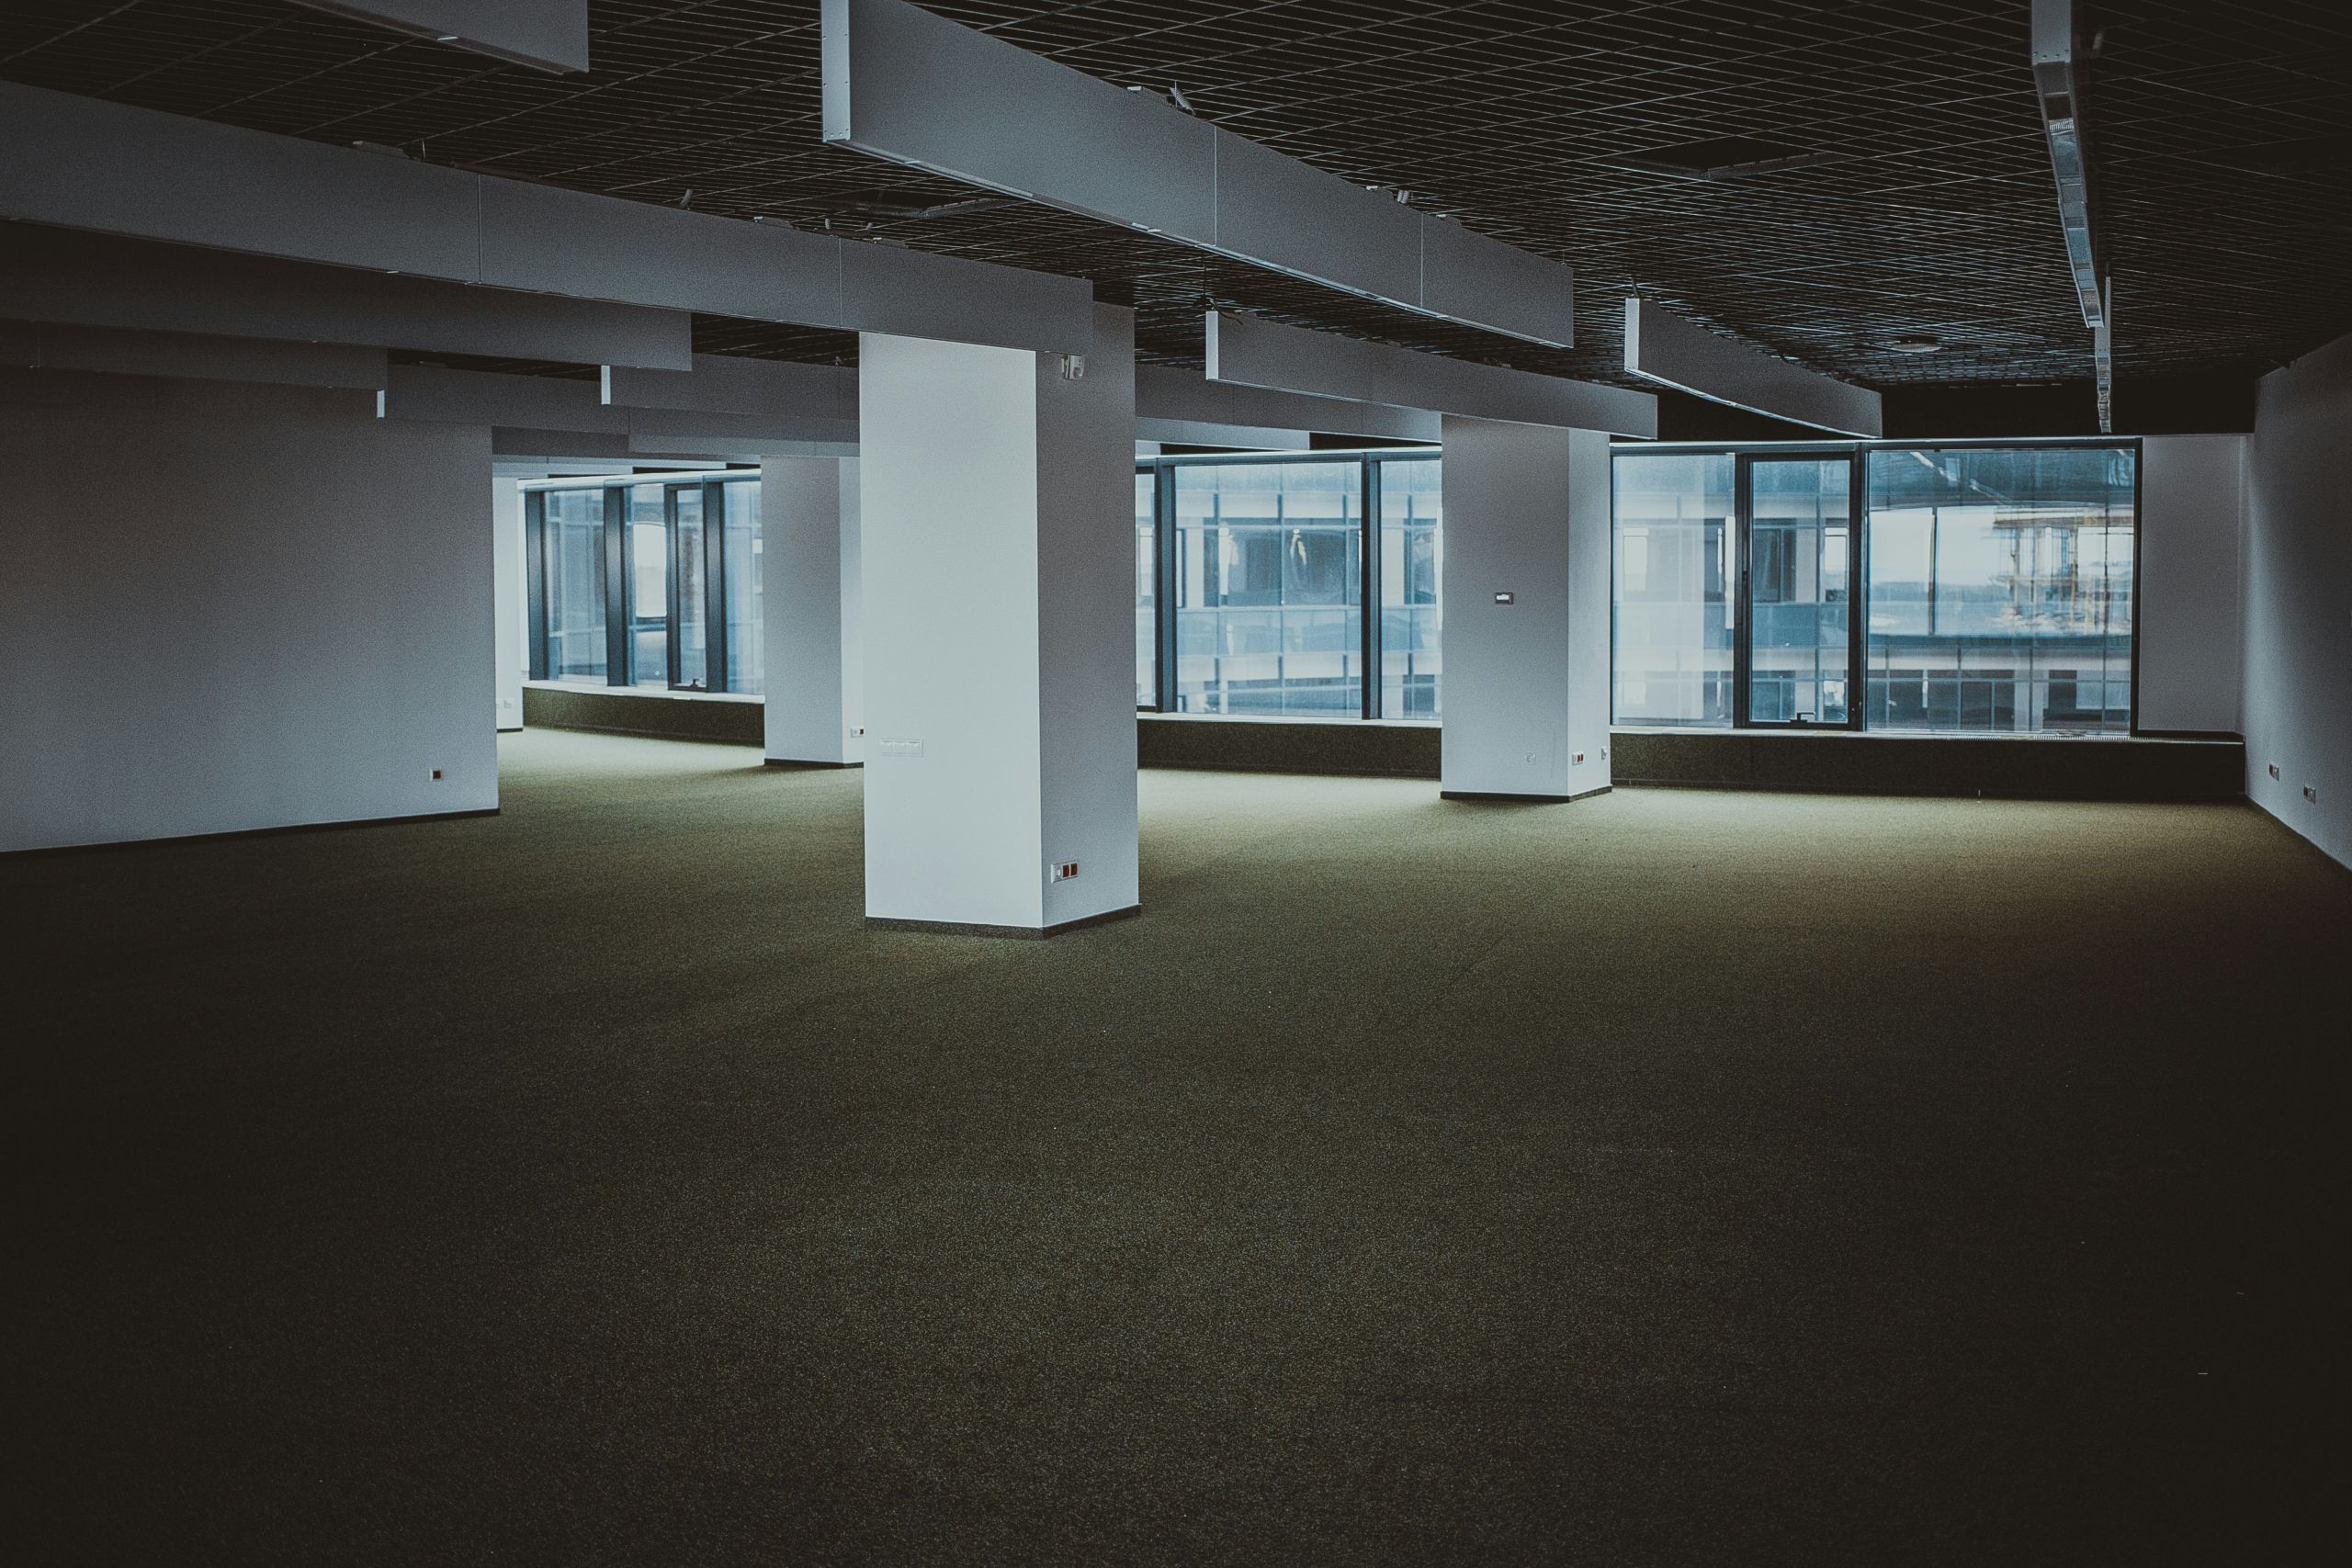 Empty office space